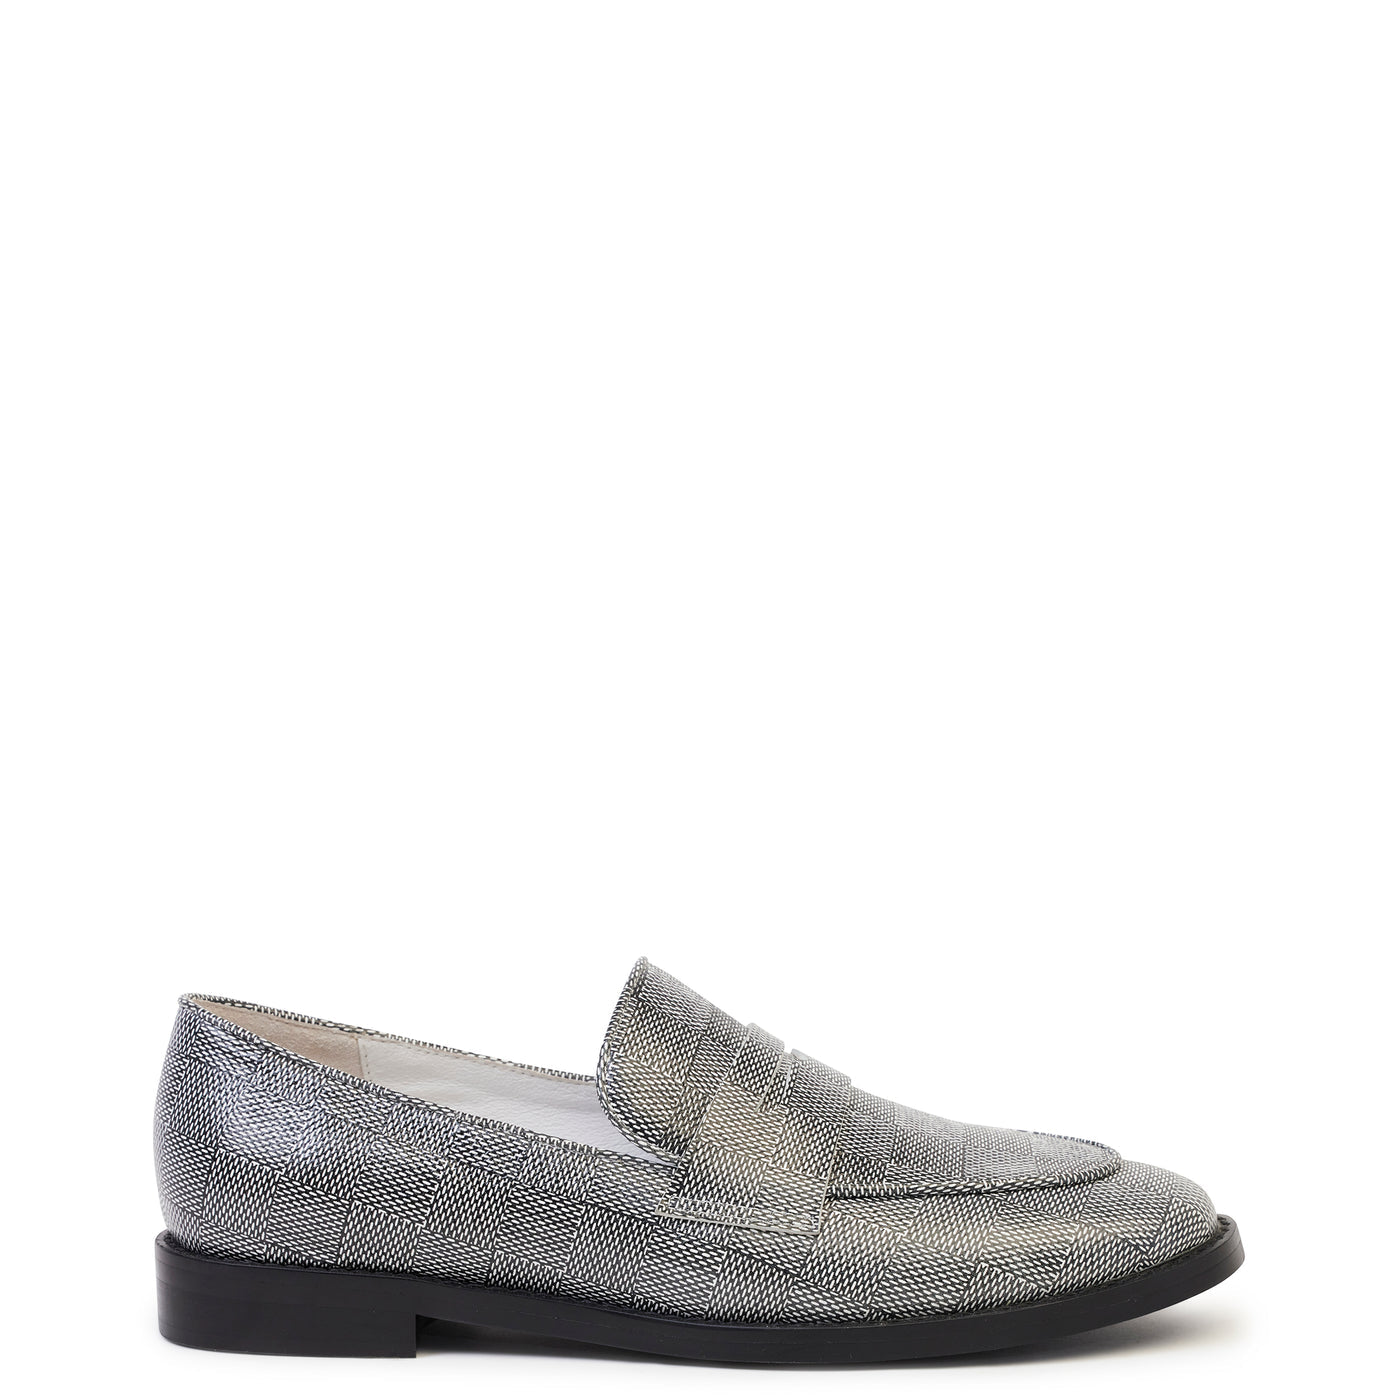 Kathryn Wilson Molly Loafer - Monochrome Check Calf